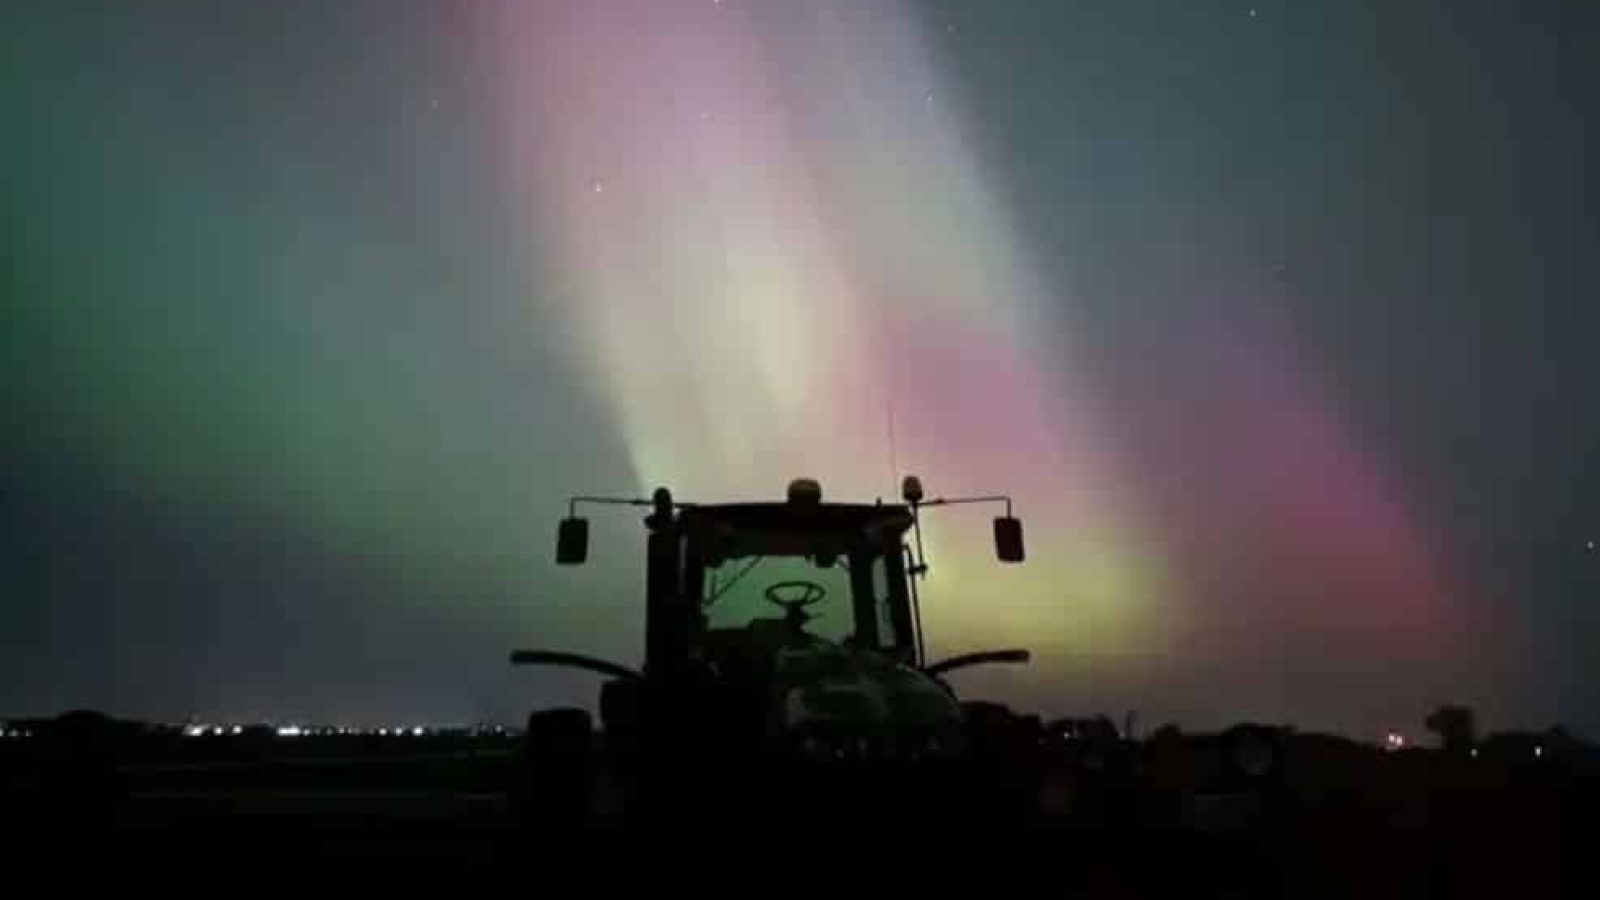 Northern lights over a tractor in a farm field